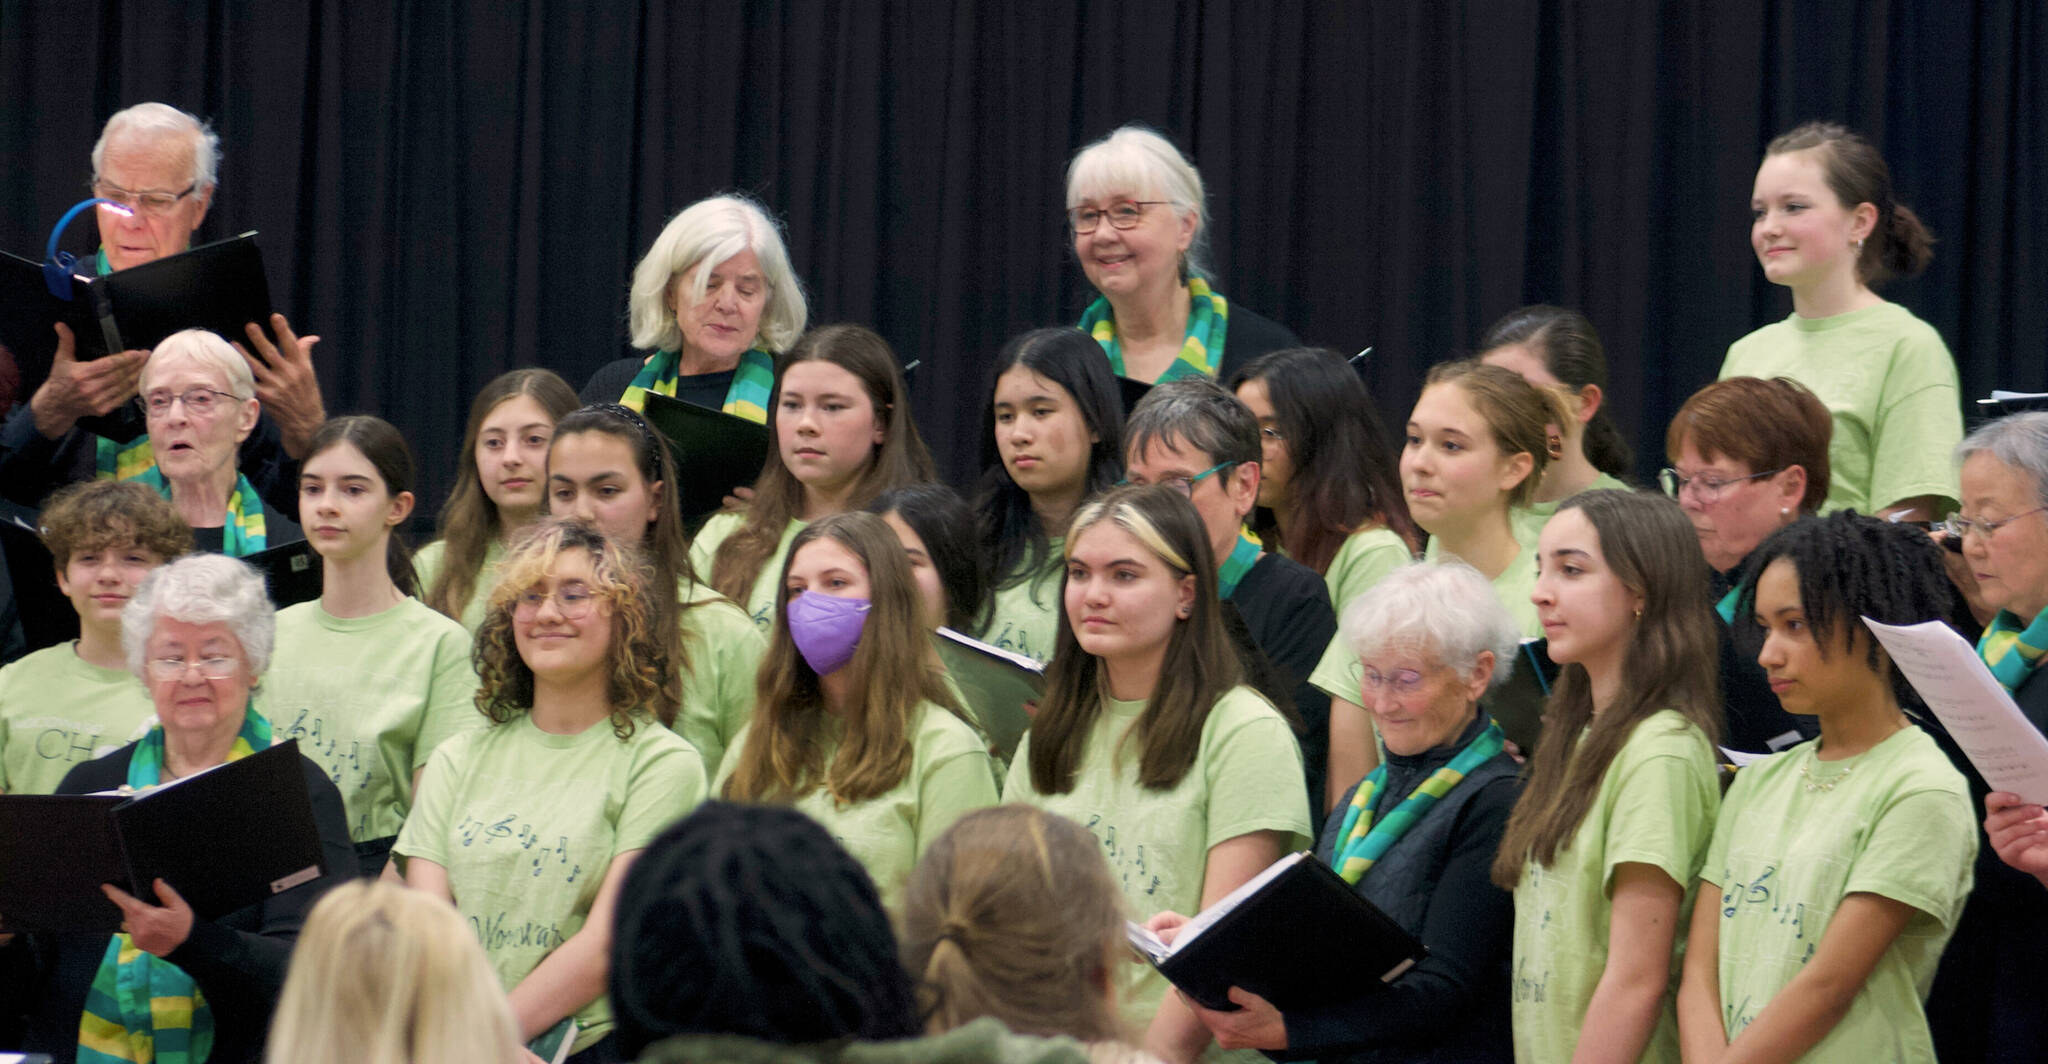 Molly Hetherwick/Kitsap News Group
The Woodward Middle School Choir and the Evergreen Singers team up to sing during the Music for All Generations concert March 27.